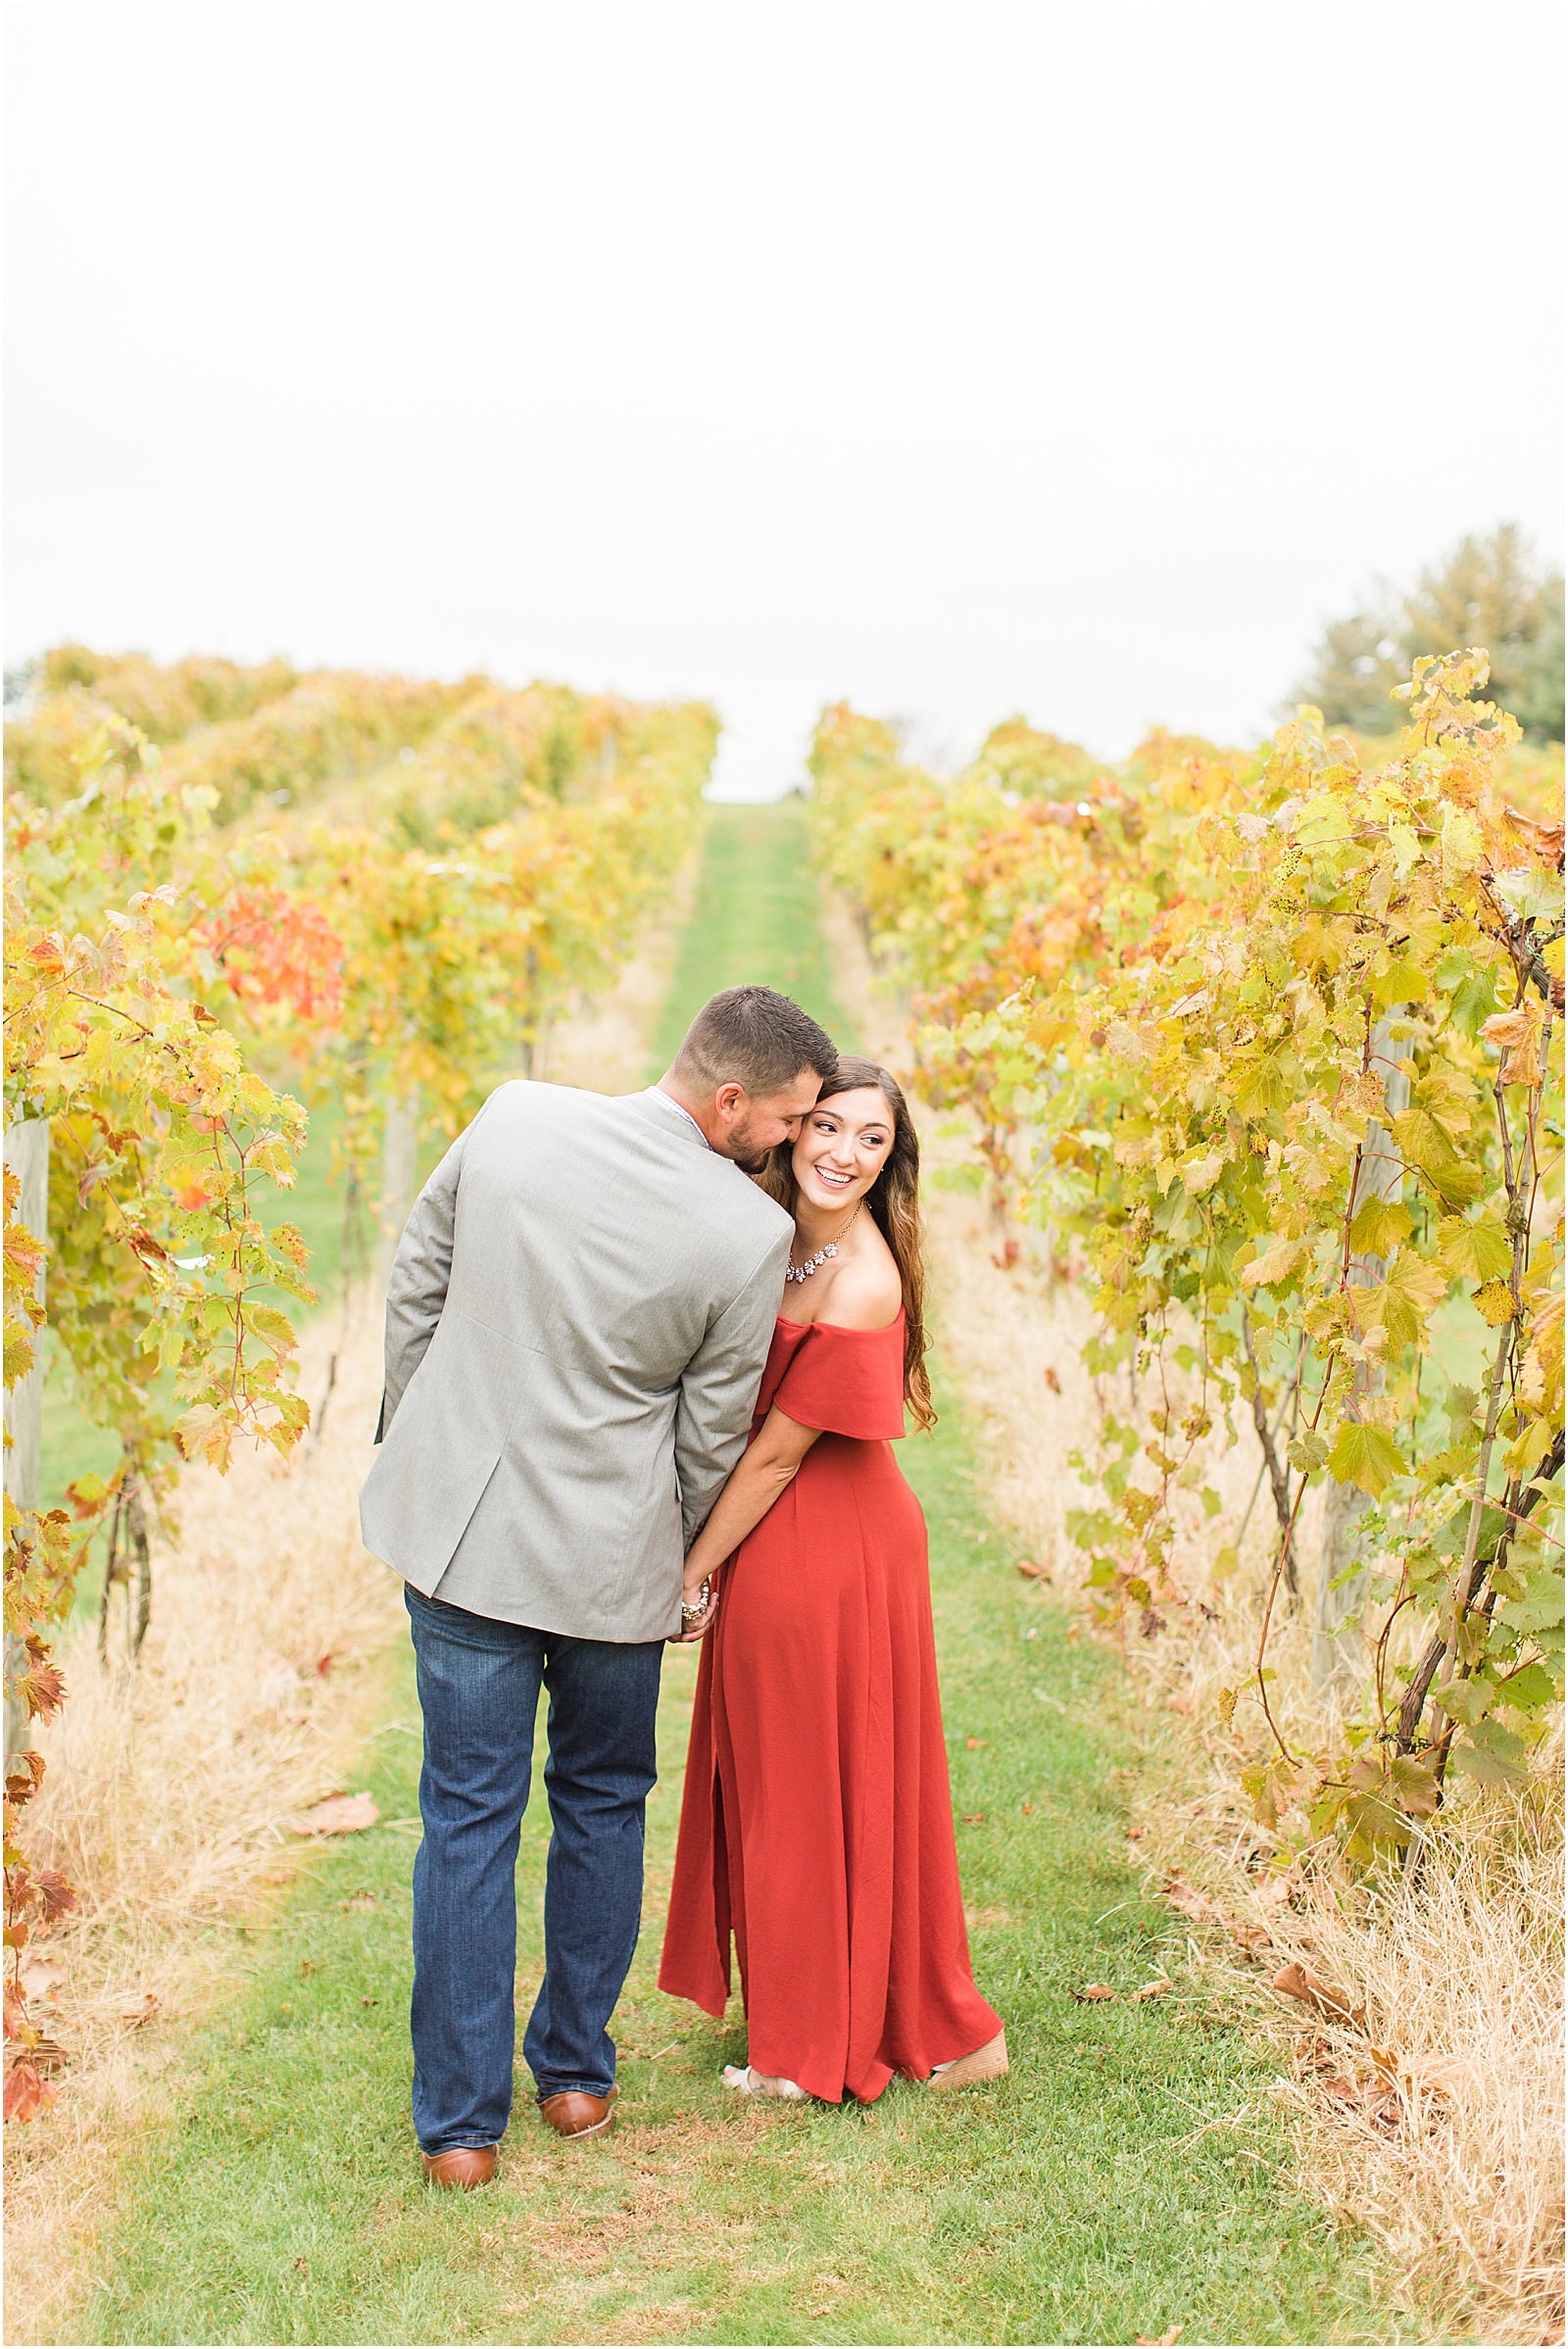 A Fall Oliver Winery Engagement Session | Sally and Andrew | Bret and Brandie Photography 0028.jpg